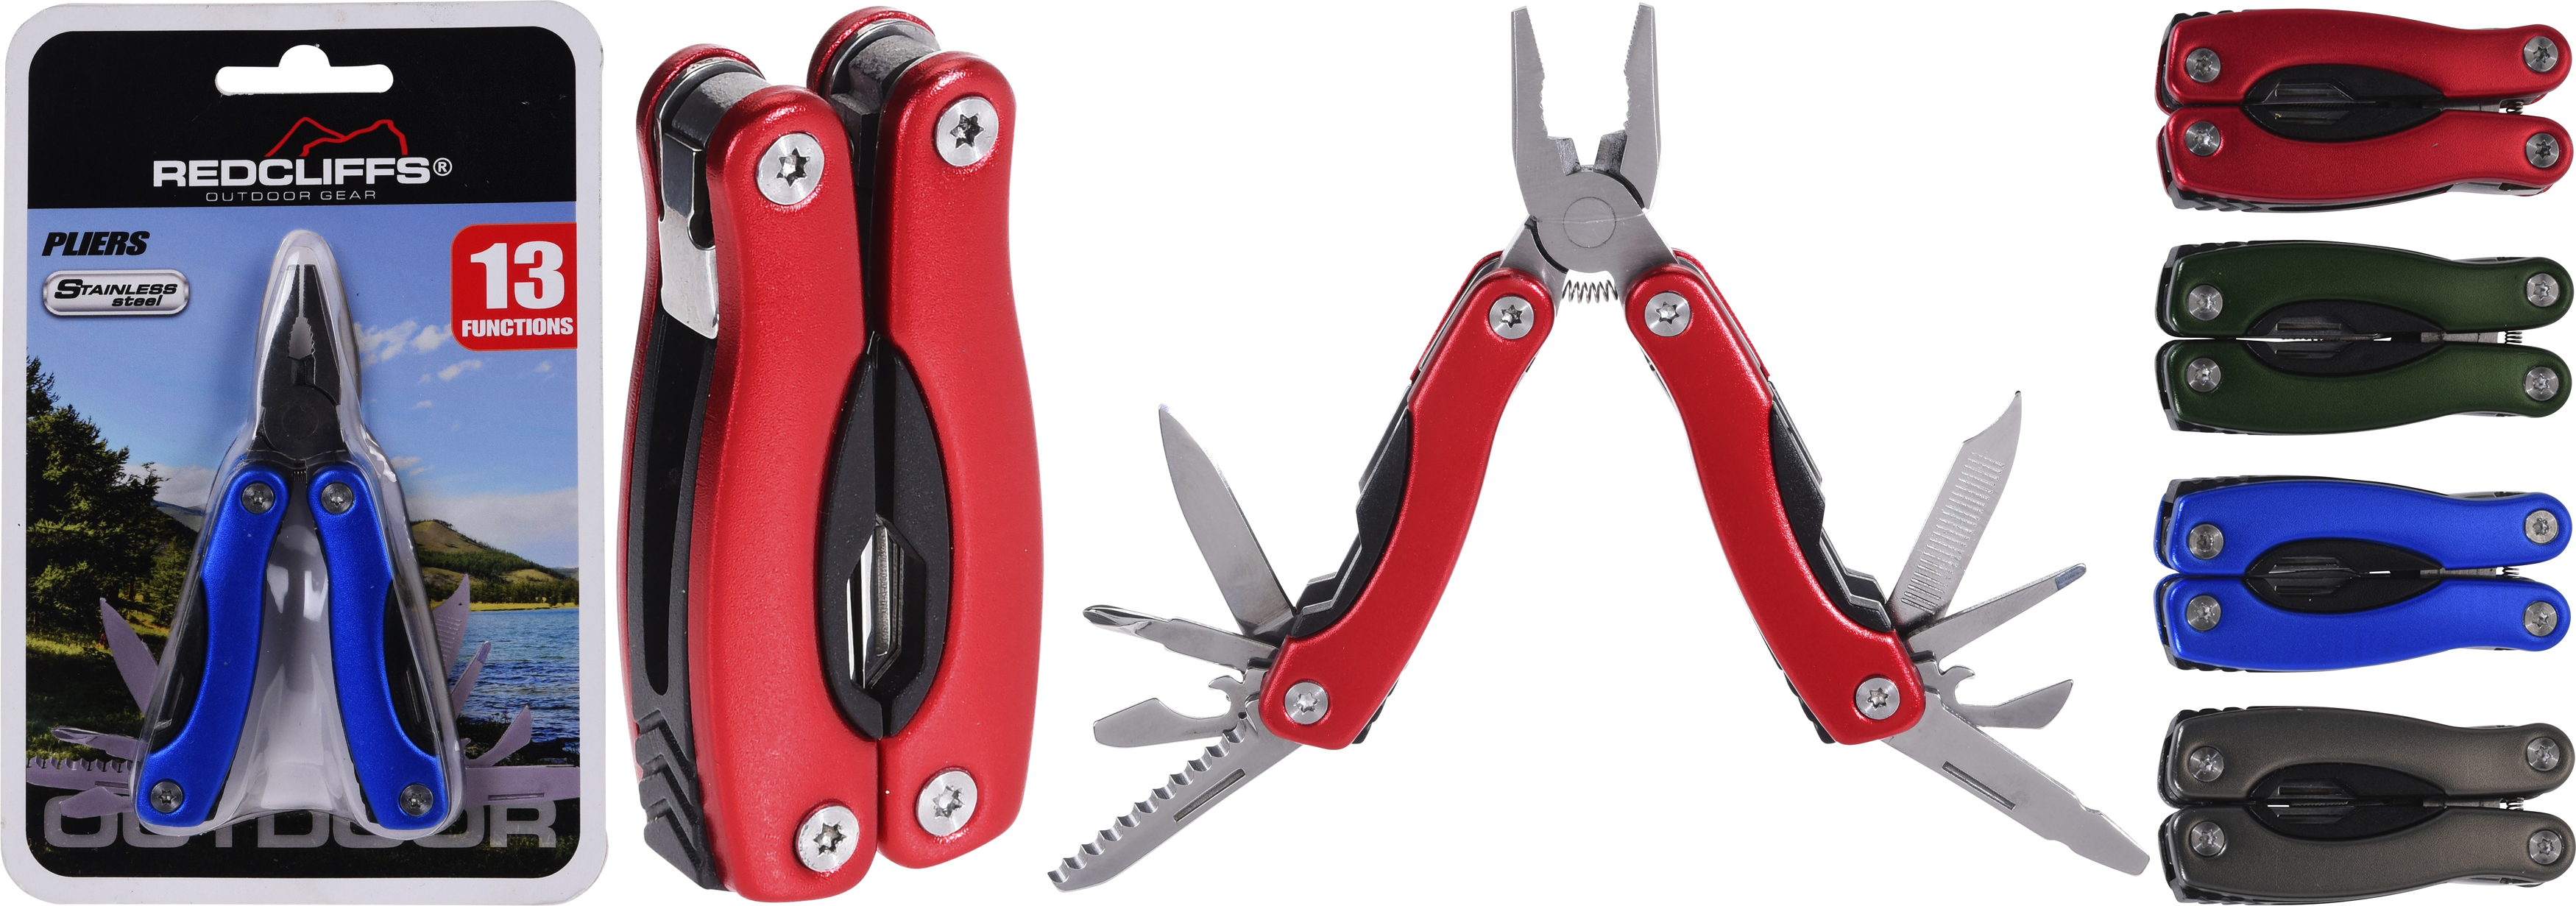 PLIERS 13 FUNCTIONS